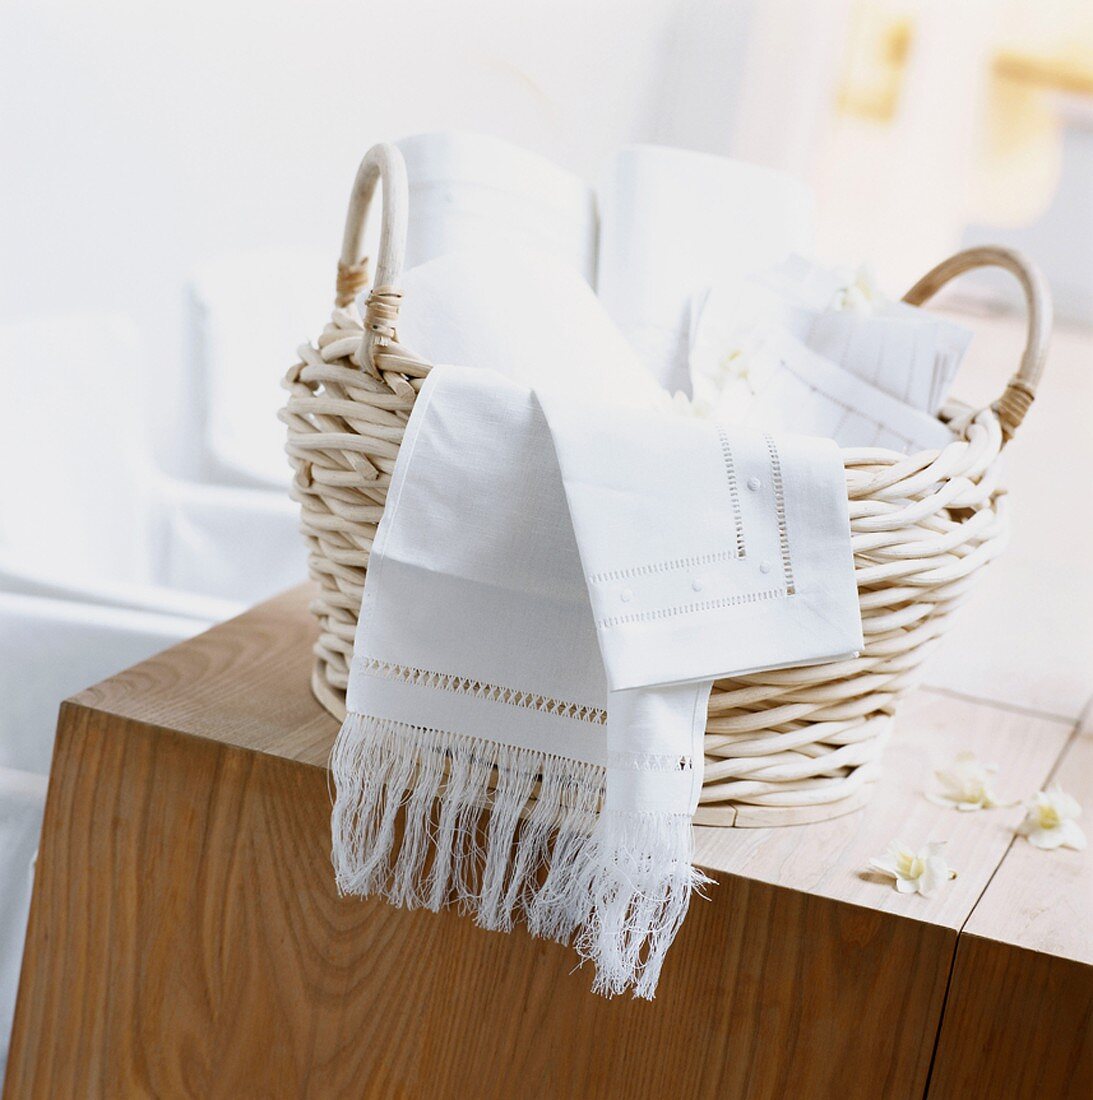 Tablecloths in a basket